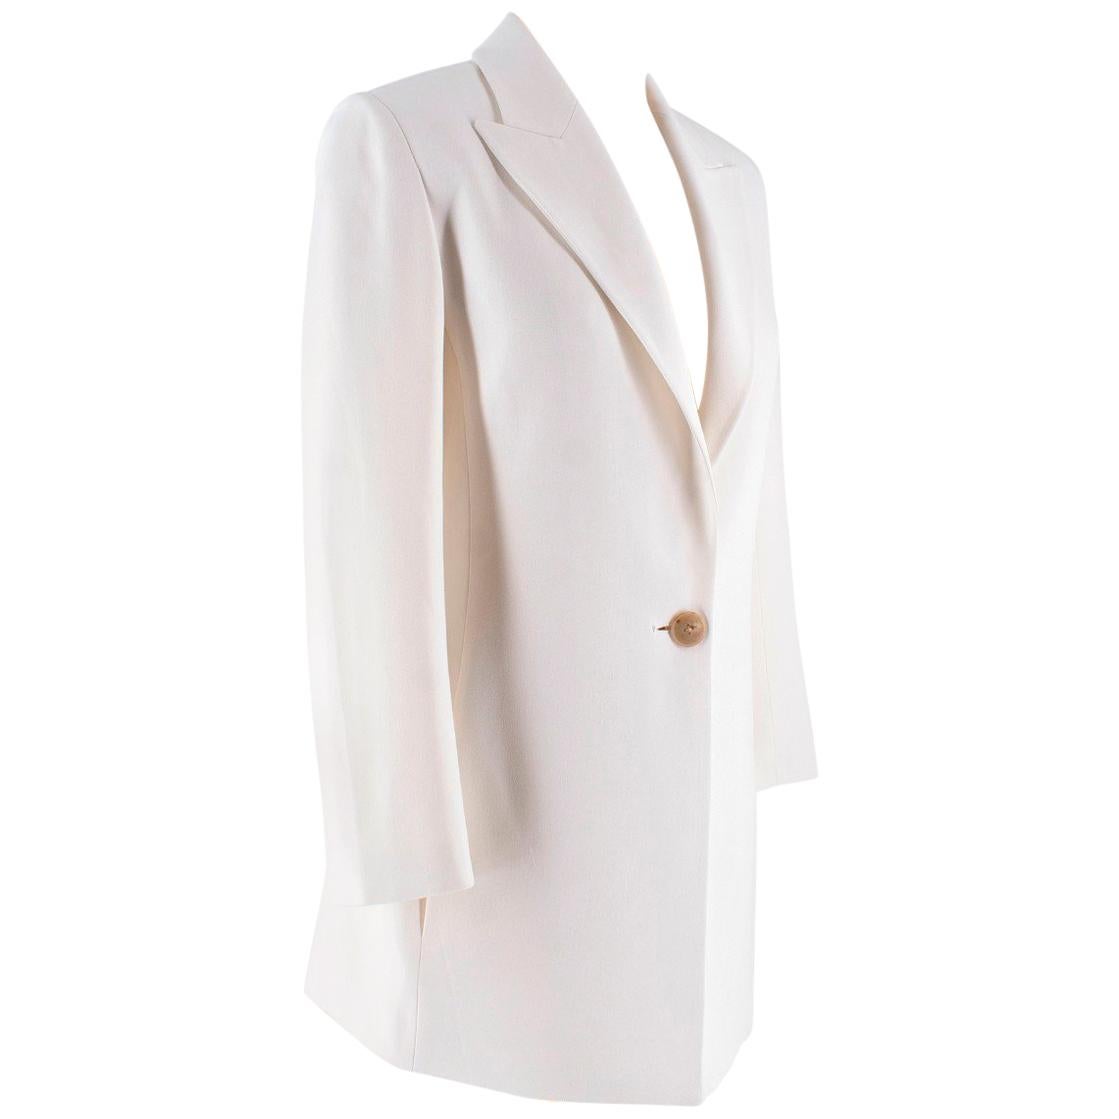 The Row White Suit - utterly timeless

-Blazer and trouser suit

Trousers fit UK size 8/10 and the jacket is a Uk 6/8
There is stretch to the material so is super luxurious and comfortable
Please email admin with any questions  


Blazer:
-White